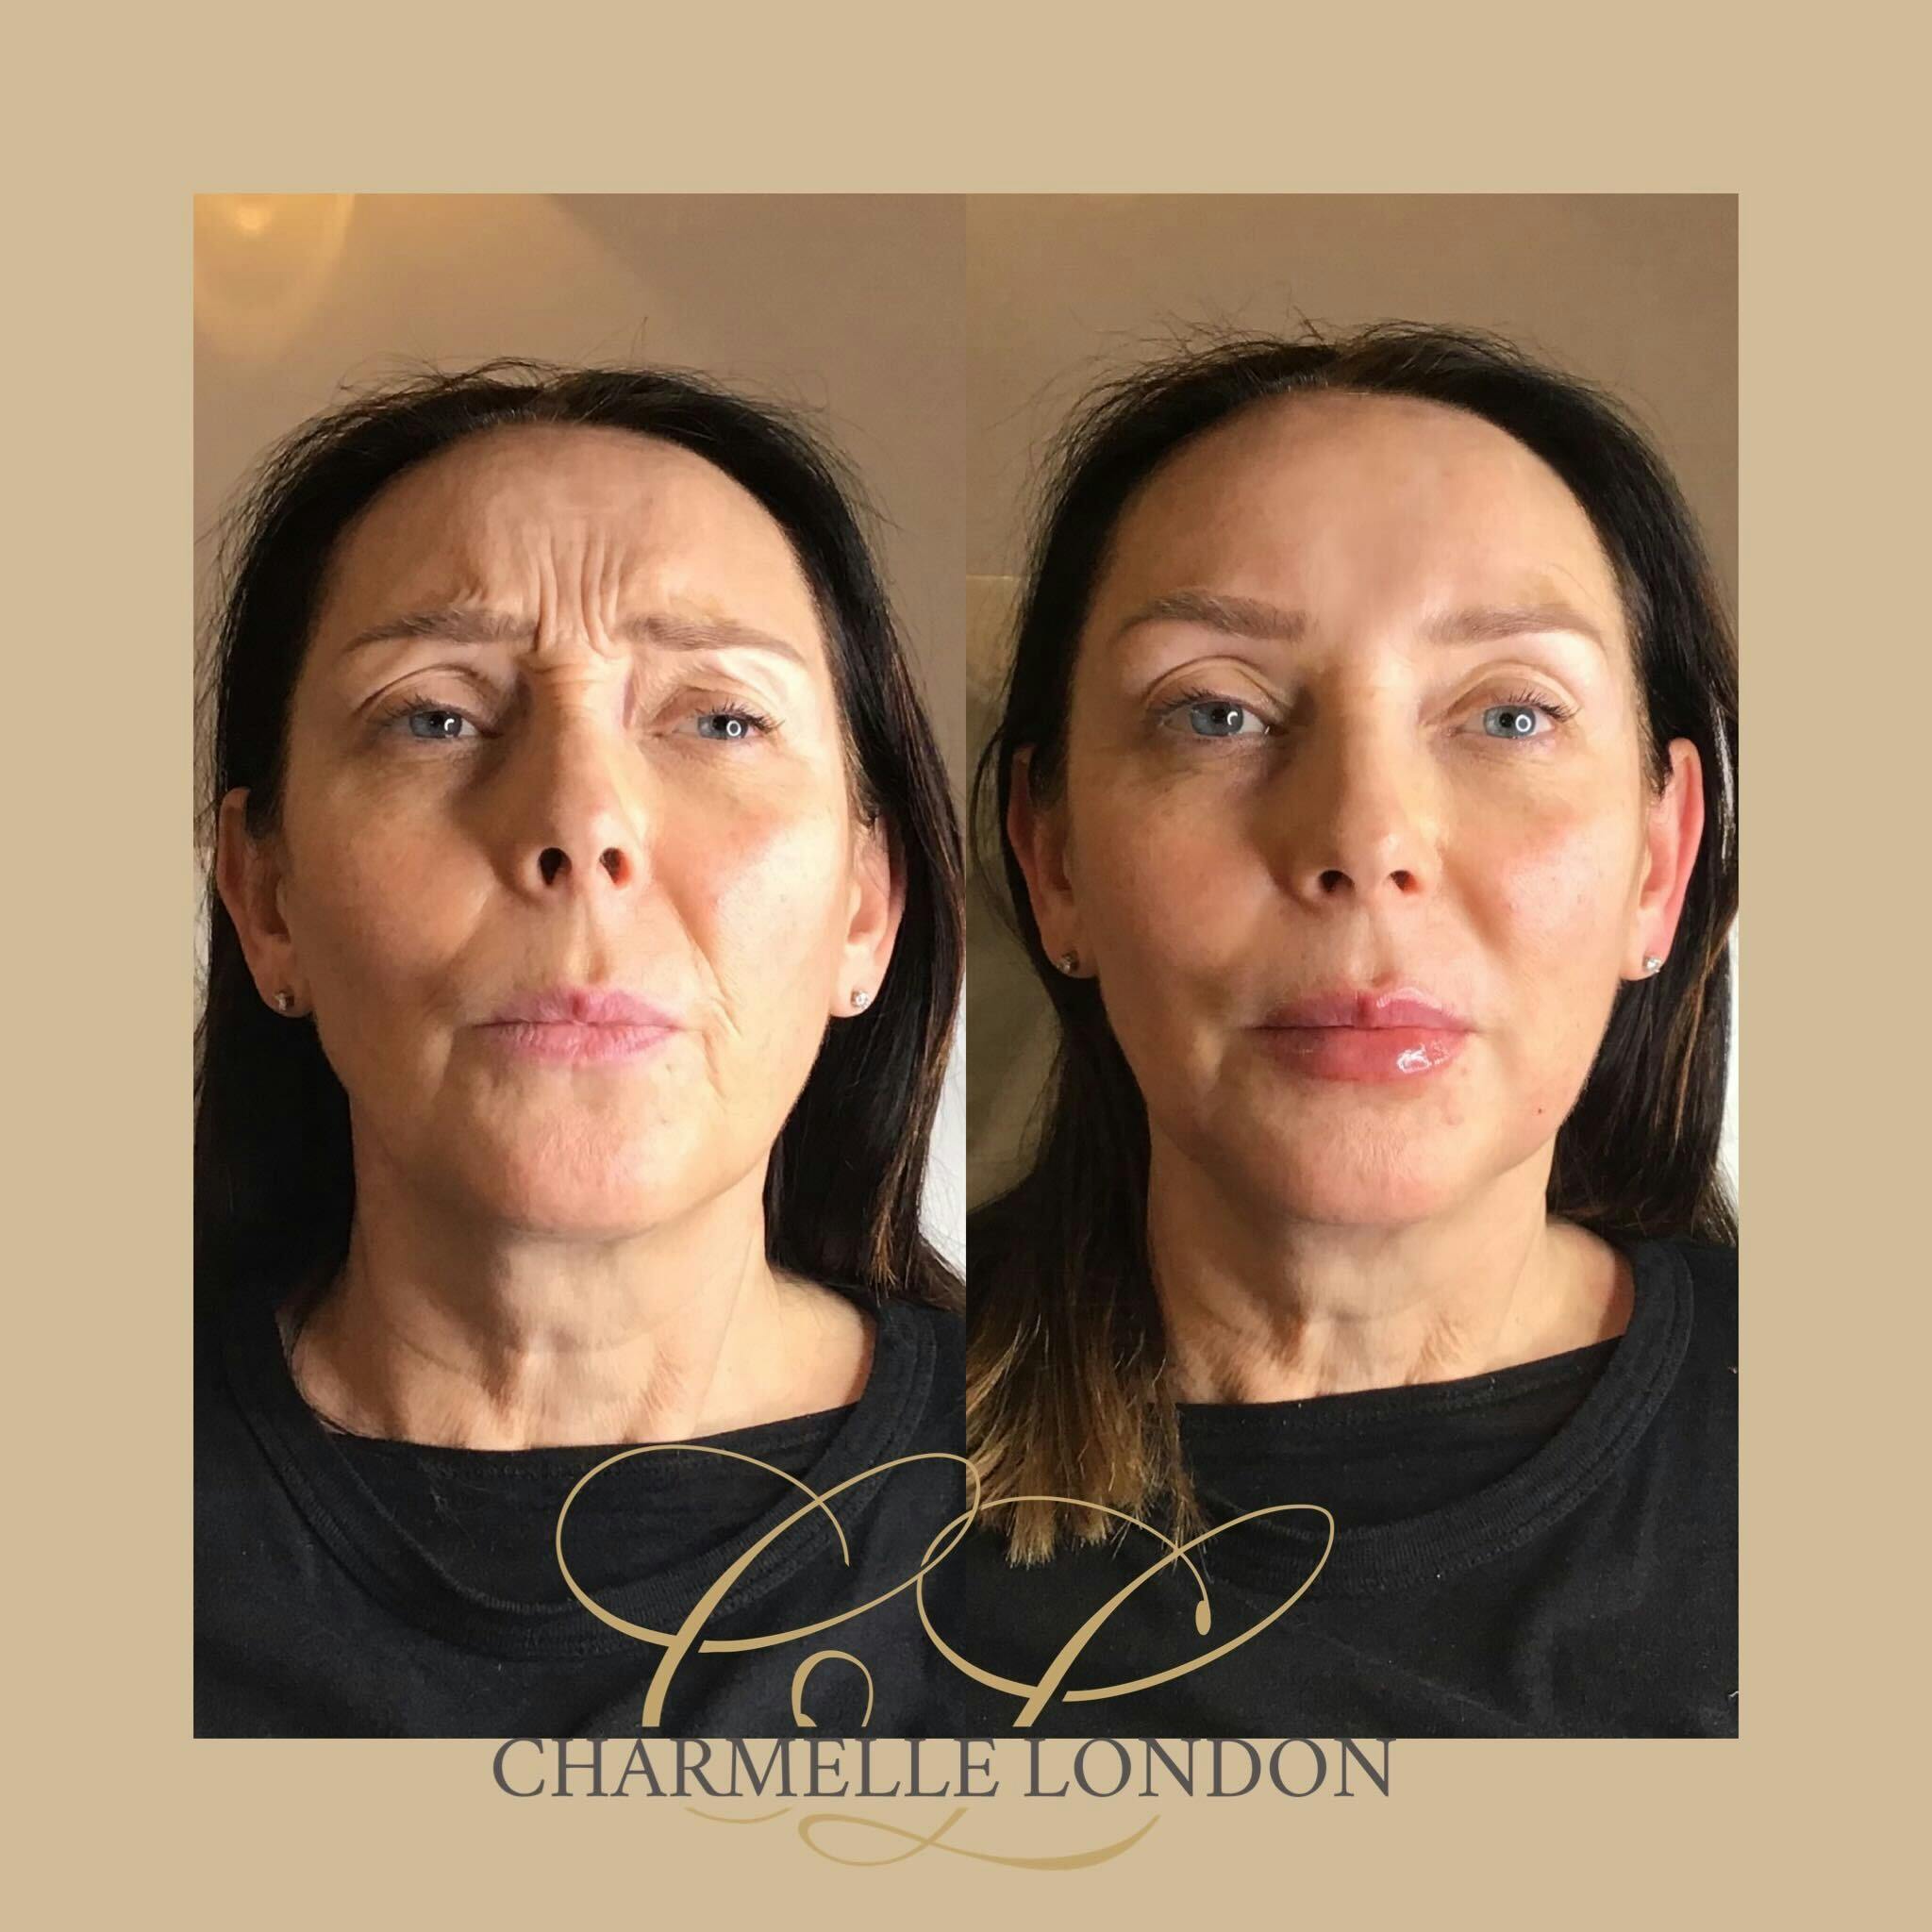 Wrinkles and fine lines aren’t just tell-tale signs of ageing; brow frowns and wrinkles around the eyes, like crow’s feet, can also make you look tired or ‘hard’.